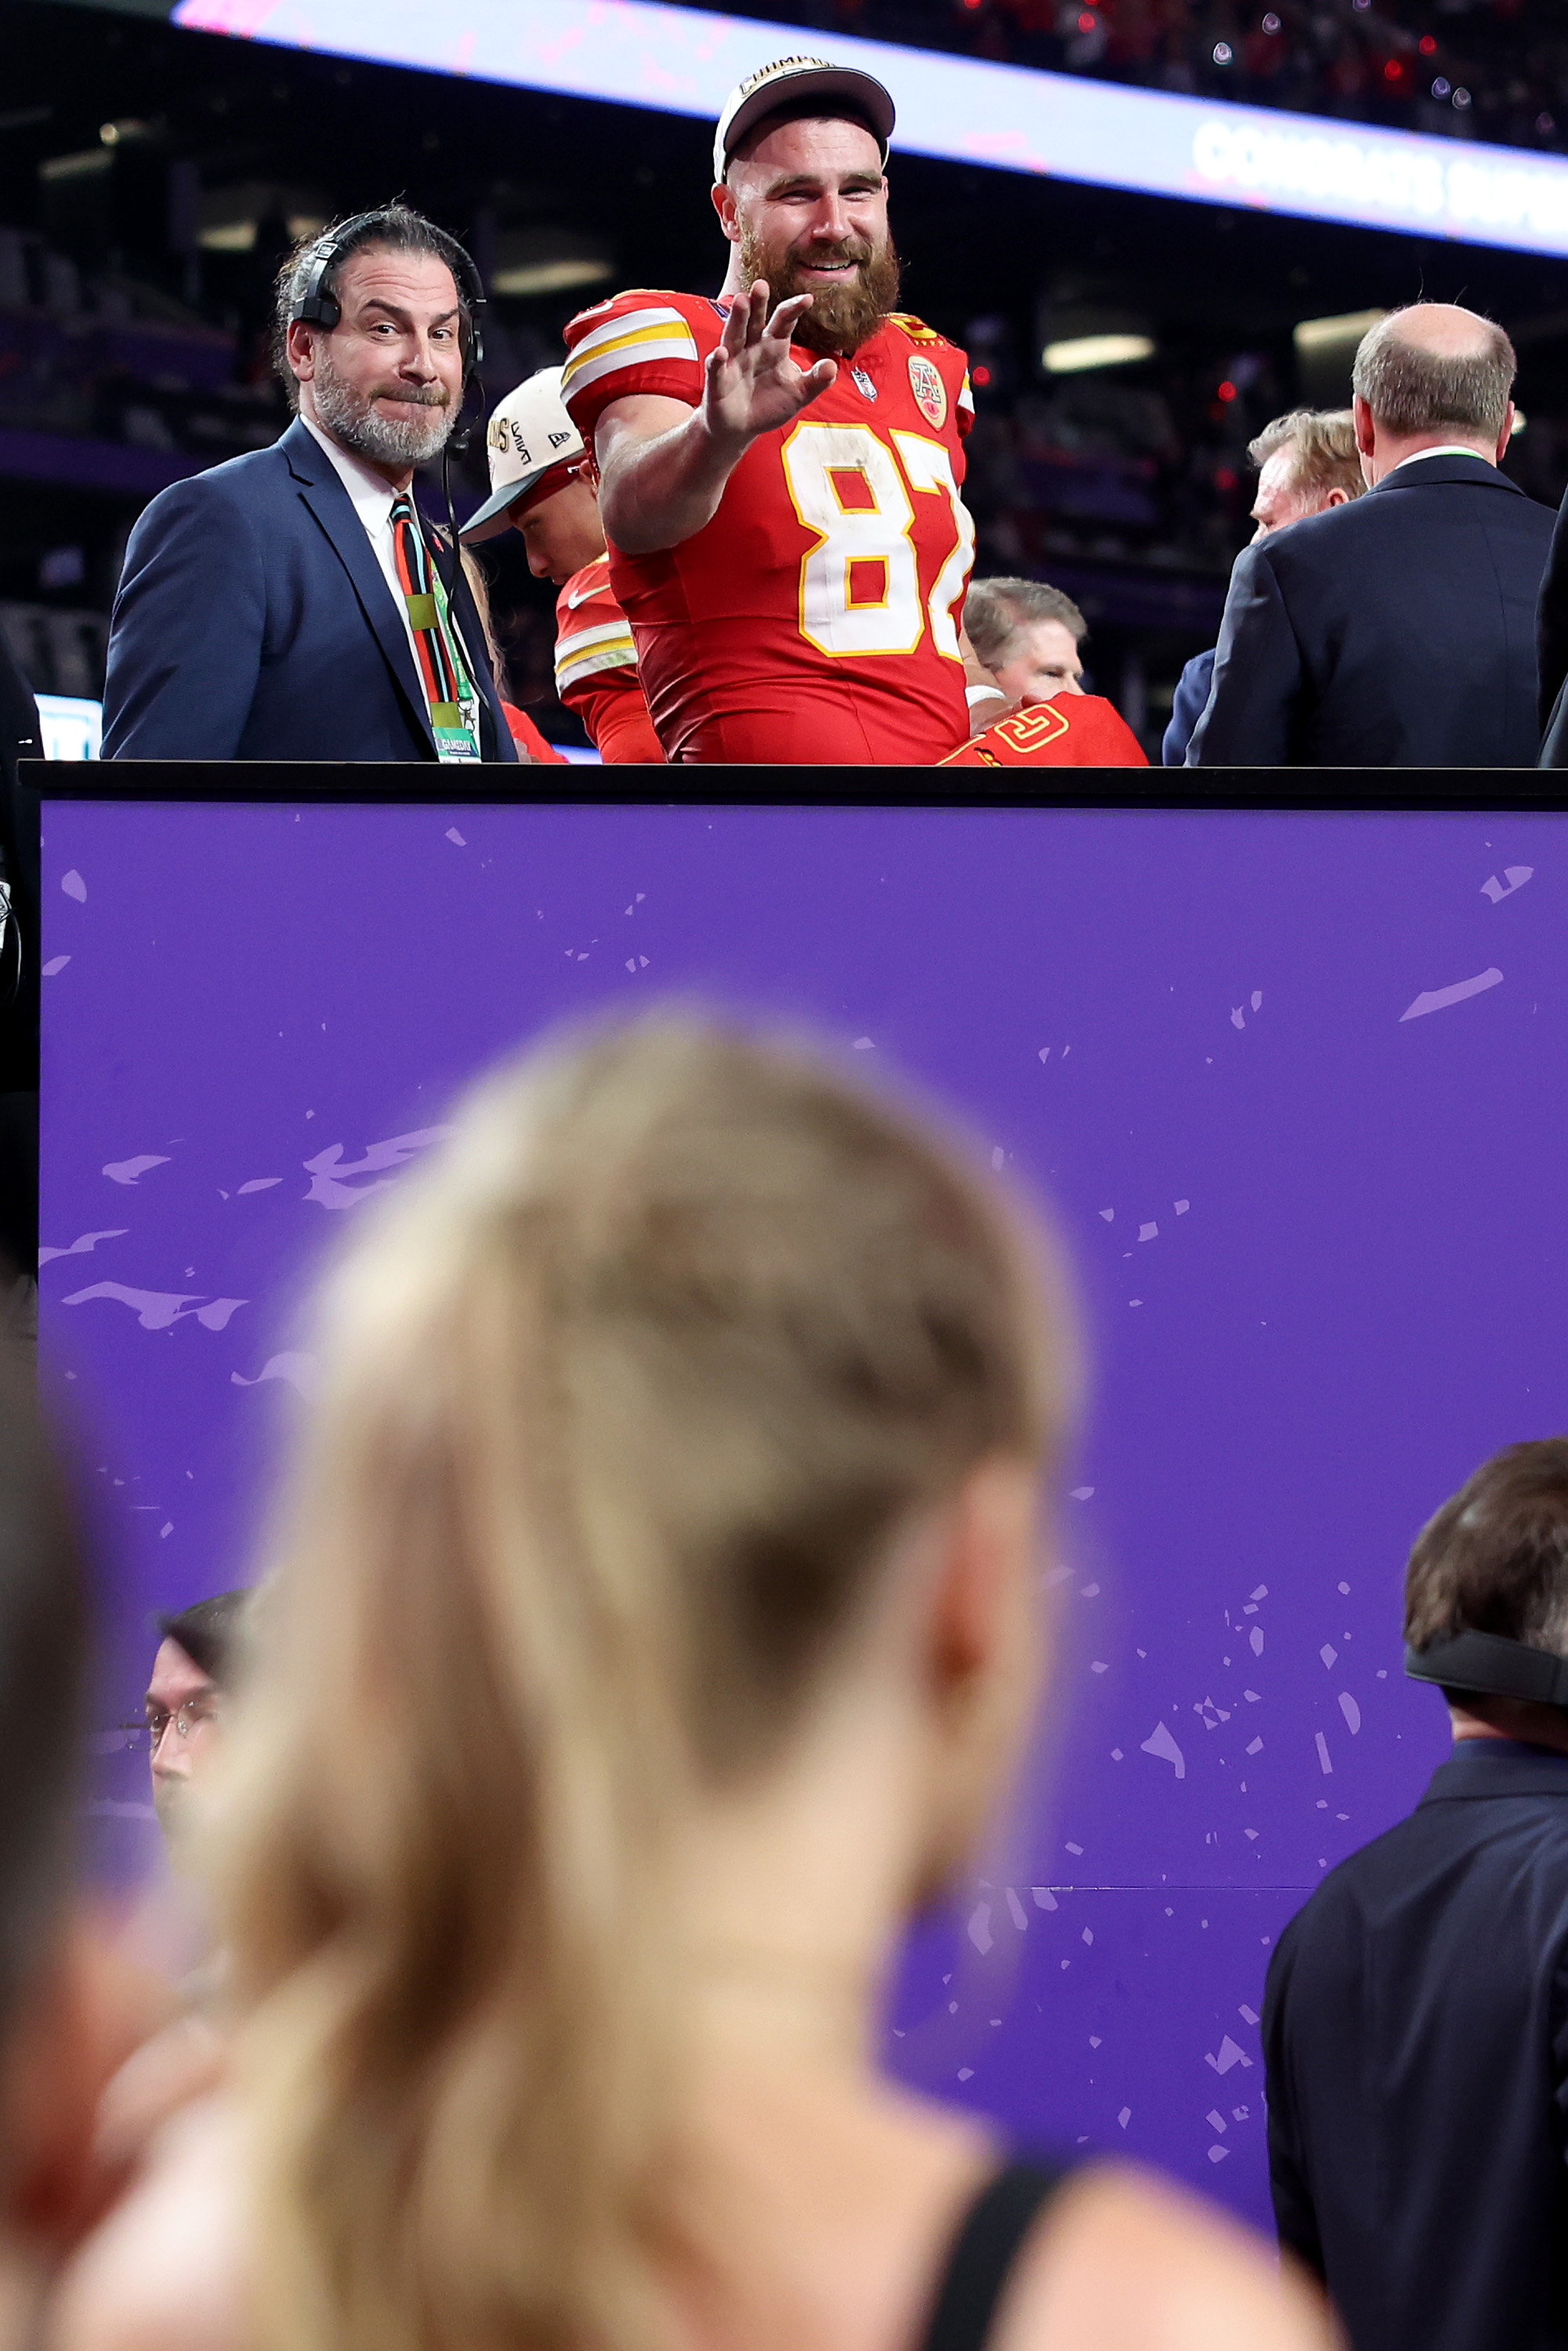 Travis Kelce waving to Taylor Swift after his team, the Kansas City Chiefs, defeating the San Francisco 49ers during the Super Bowl LVIII game on February 11, 2024 at Allegiant Stadium in Las Vegas, Nevada | Source: Getty Images